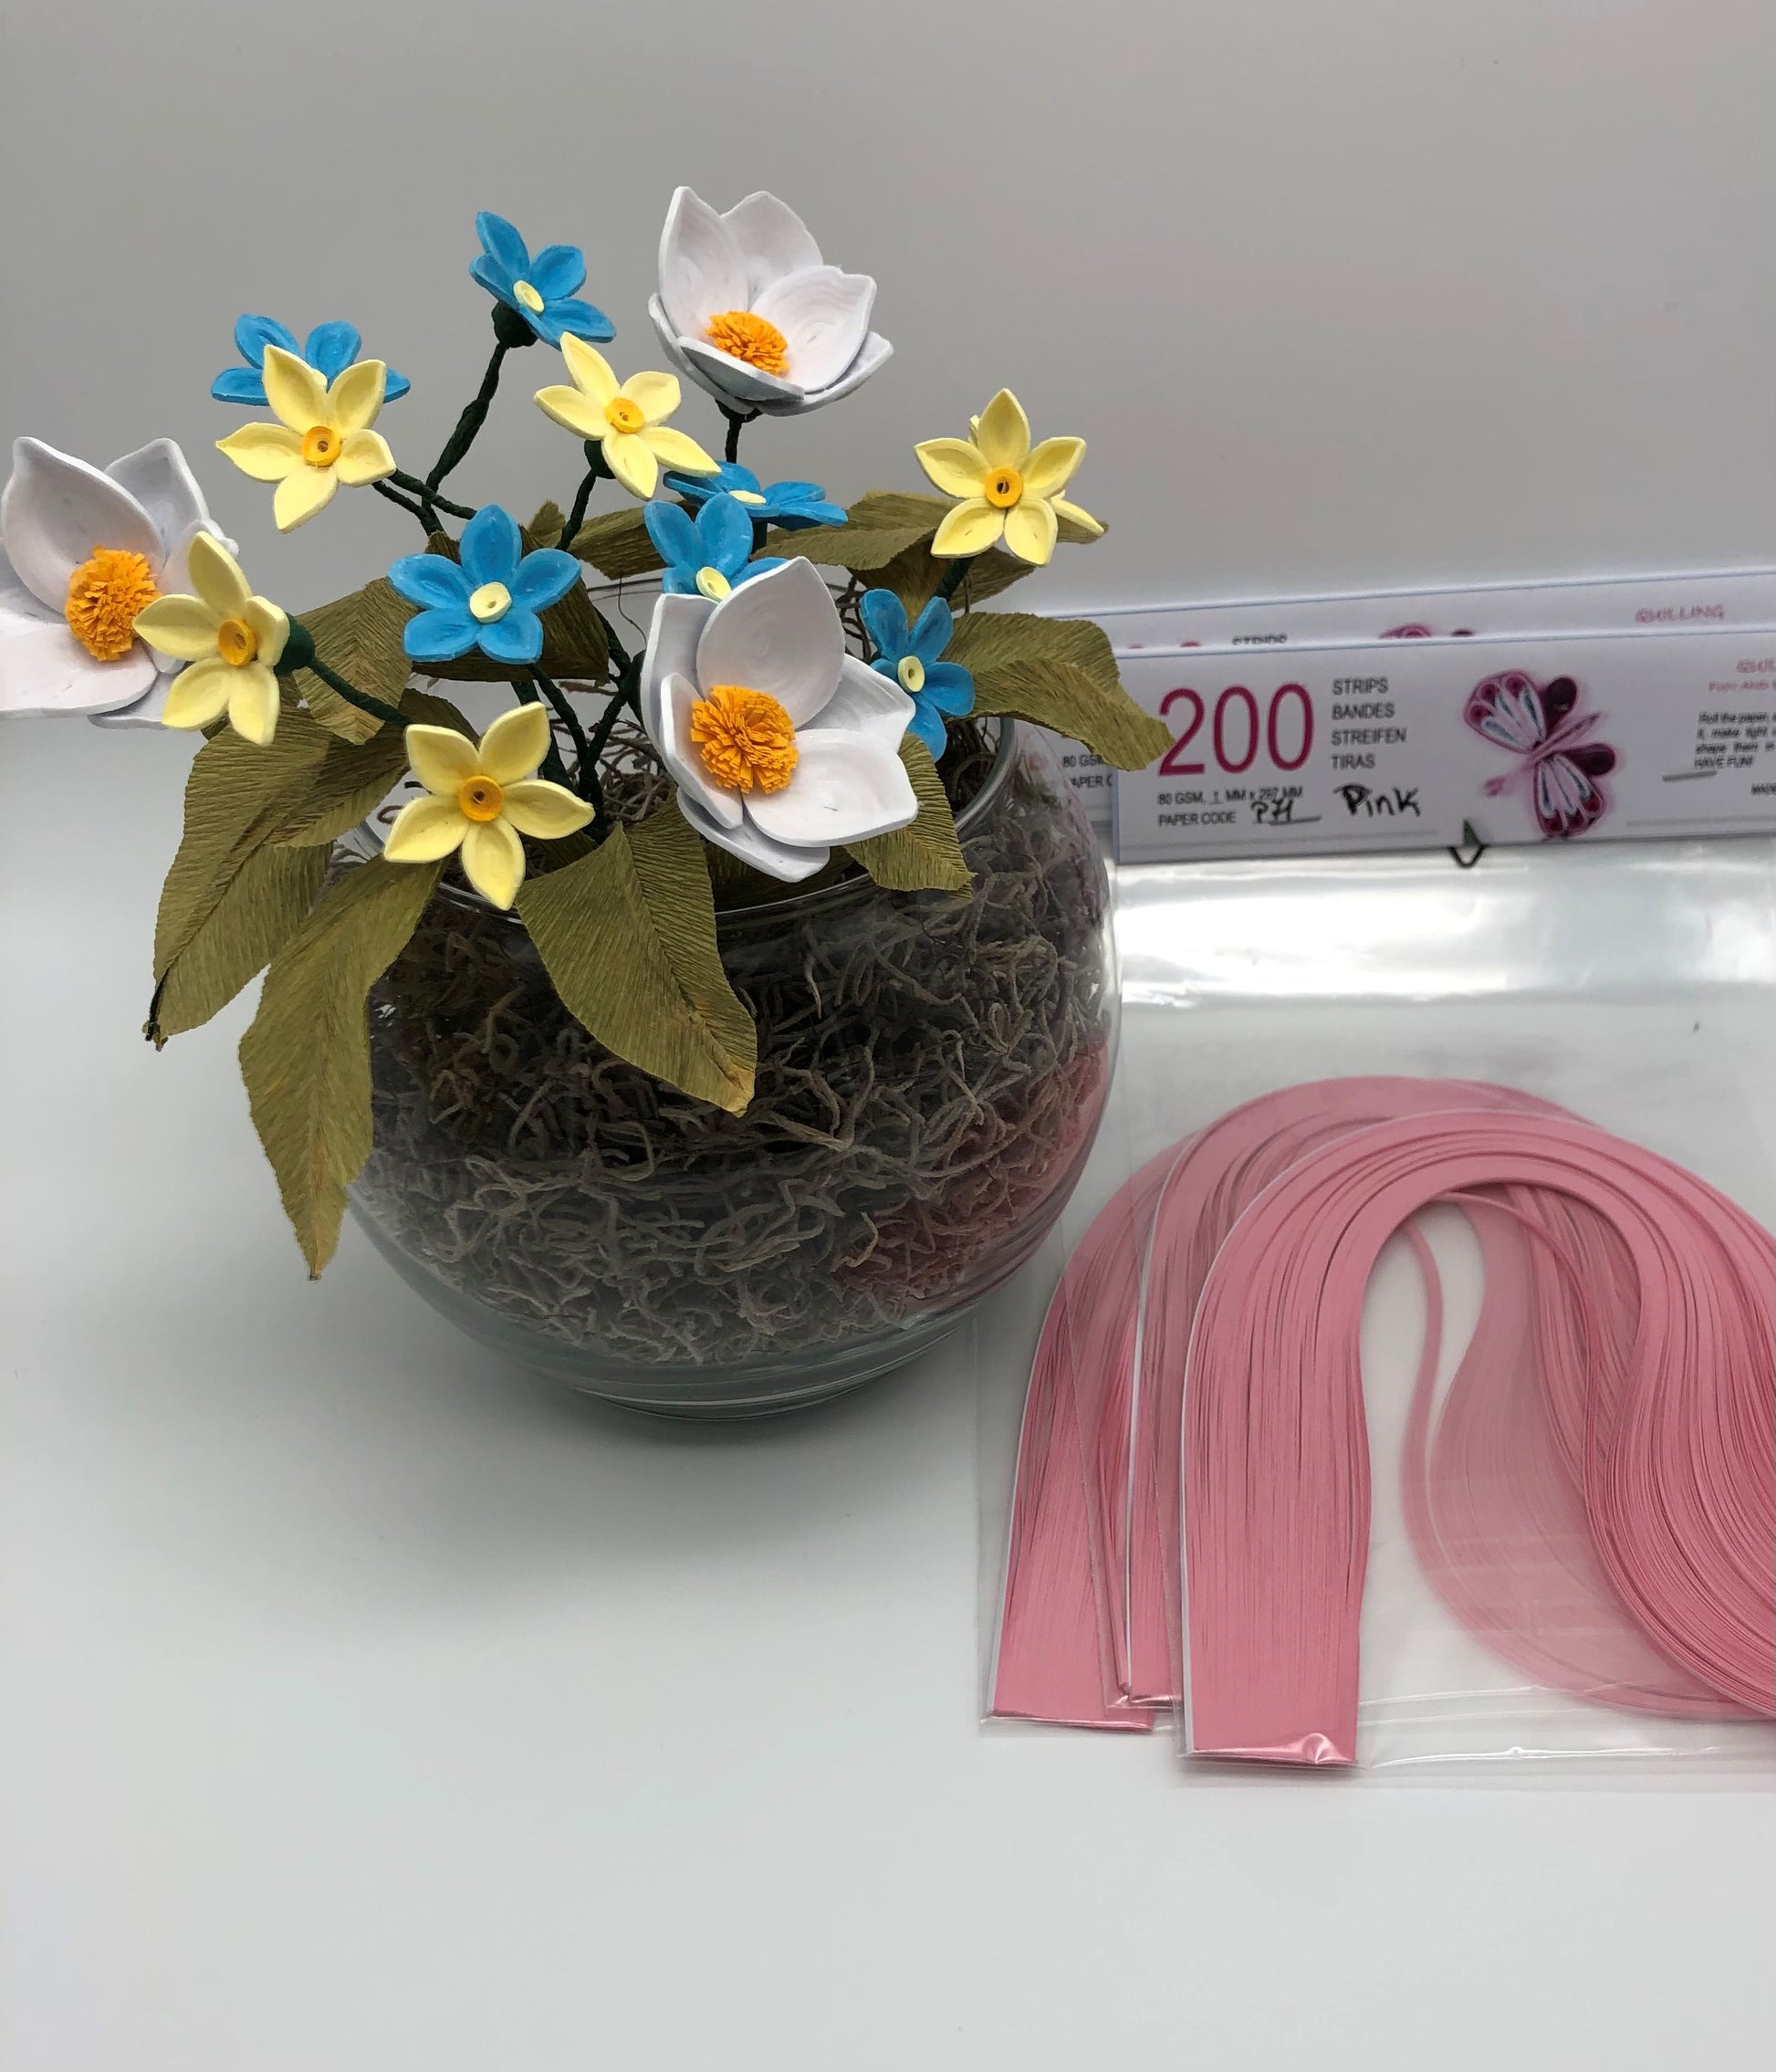 Beginning 1mm Quilling KIT (Includes 2 tools, 1900 1mm strips and